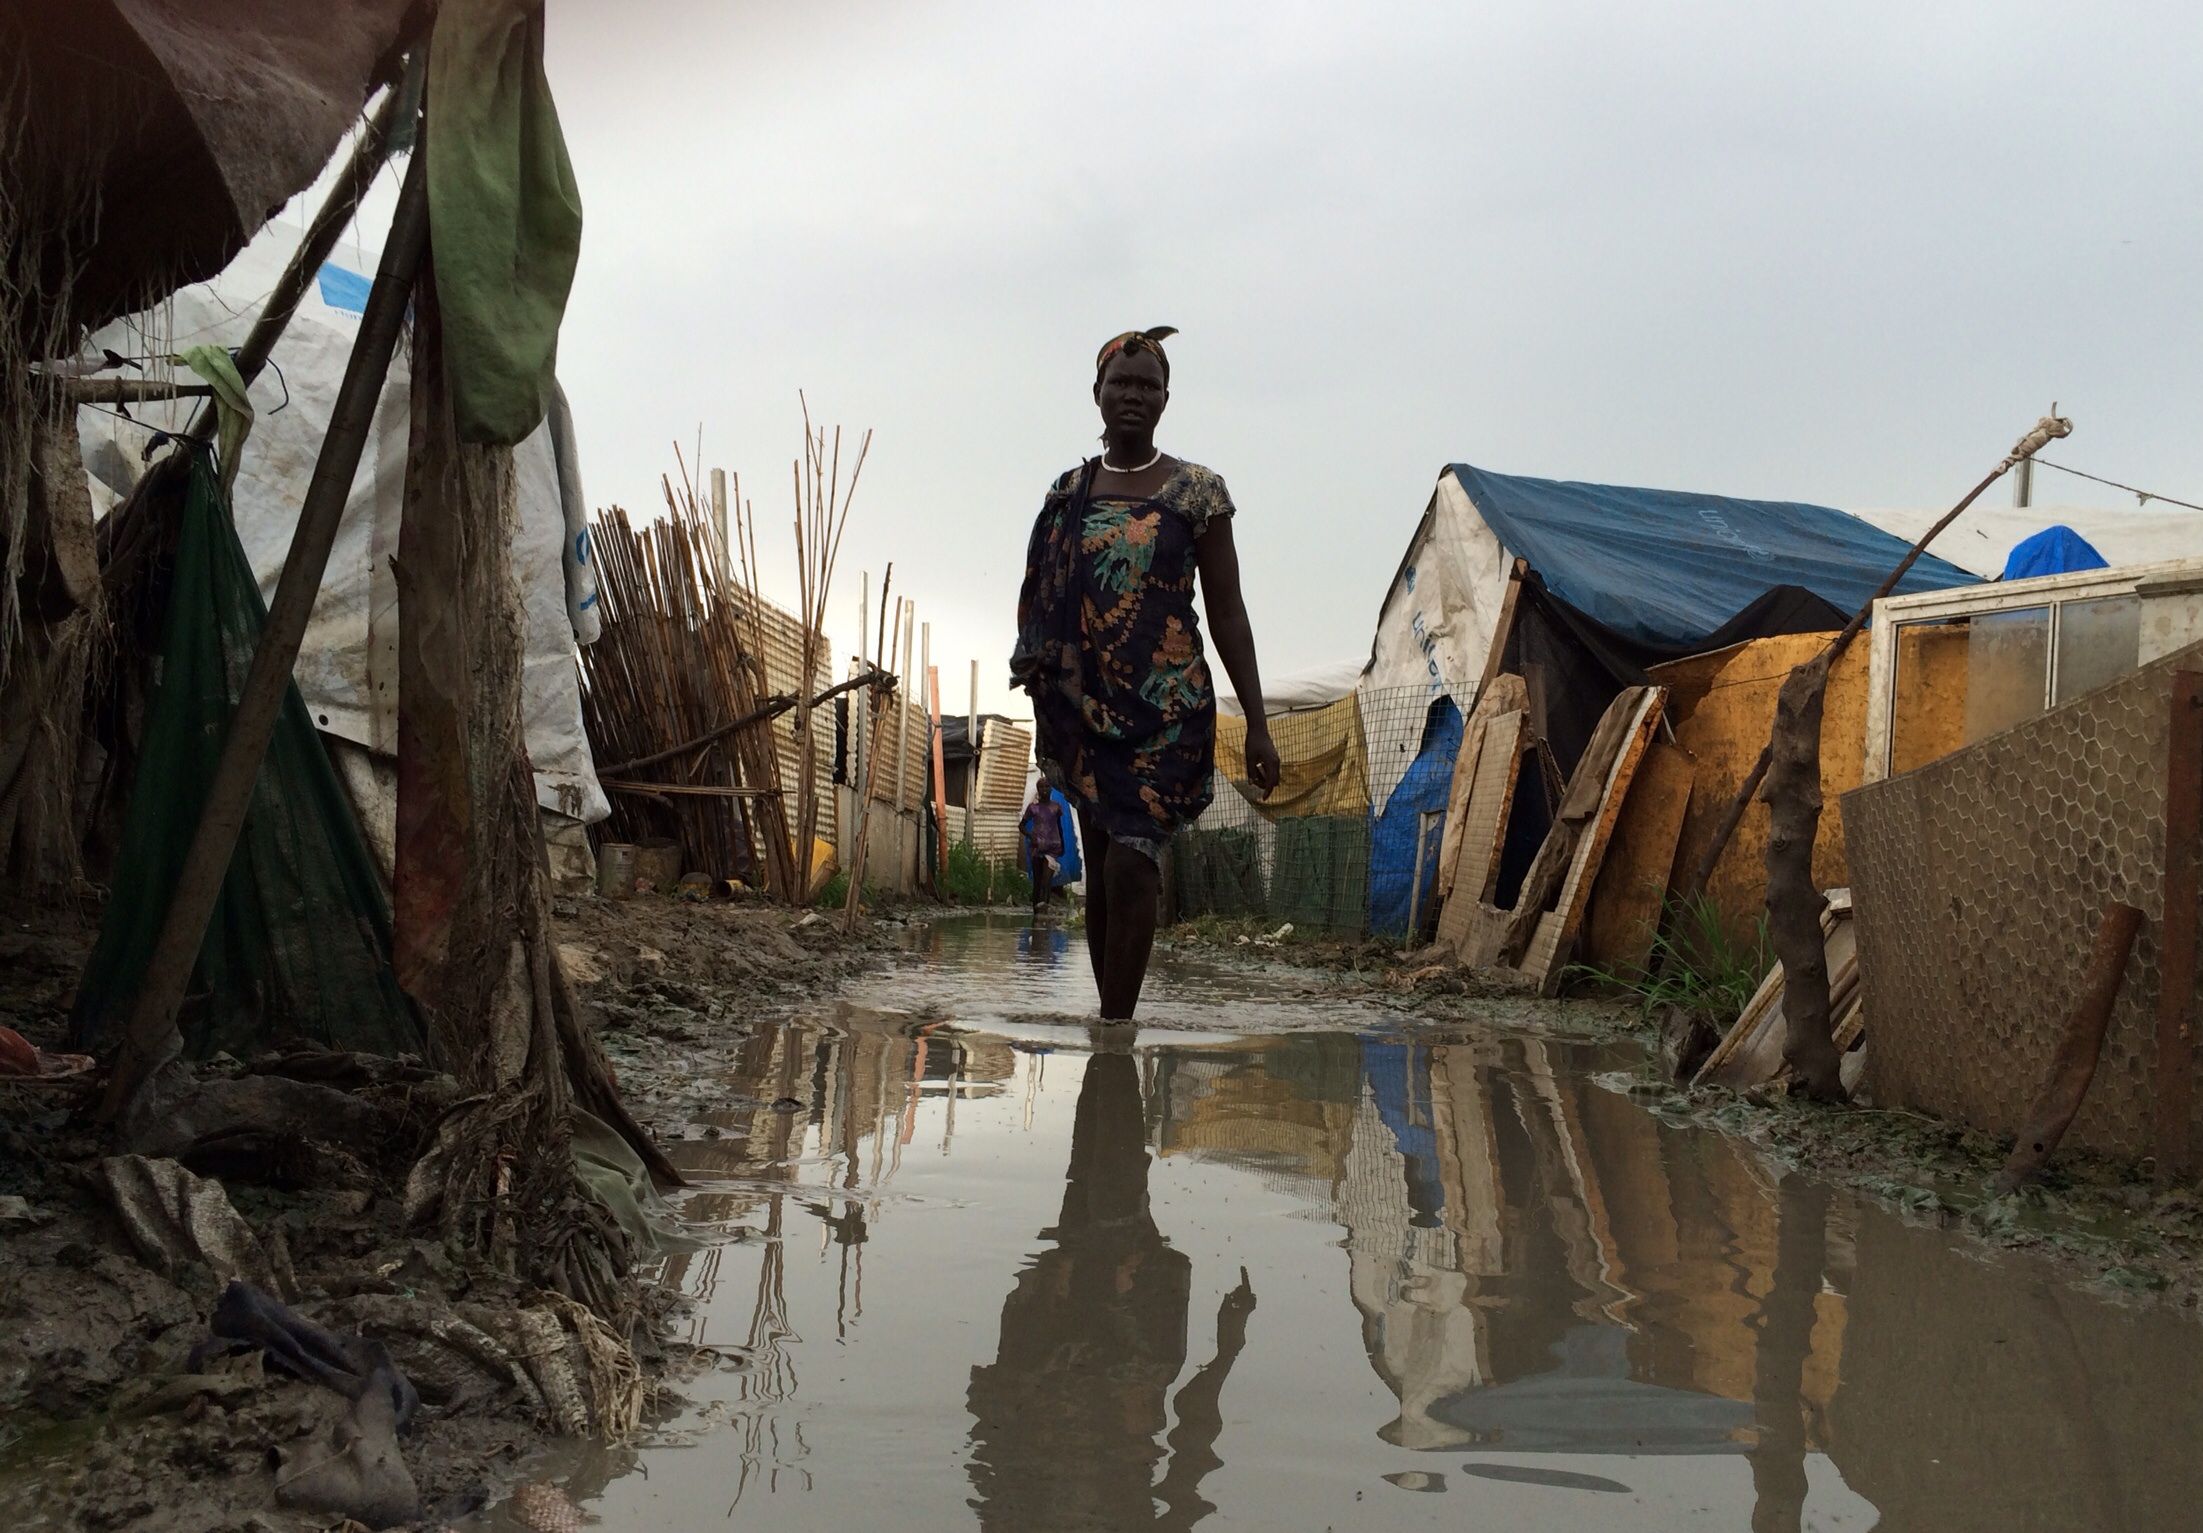 A woman walks through the flooded IDP camp in Malakal, South Sudan. Image by Ty McCormick. South Sudan, 2014.